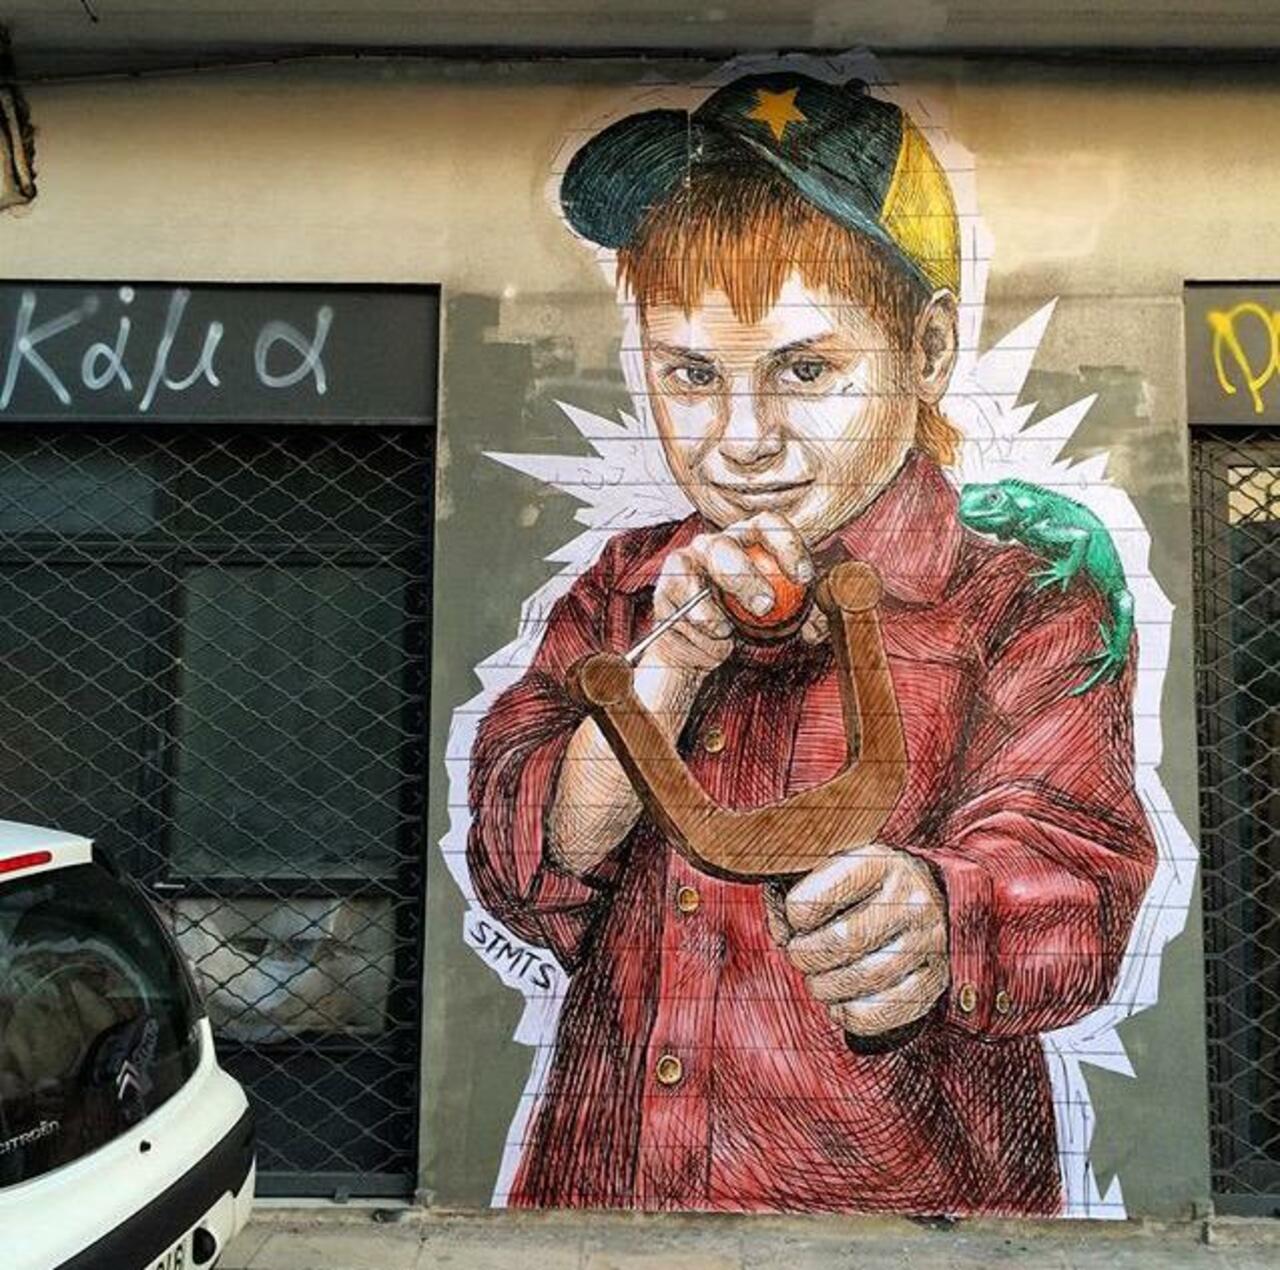 Street Art by STMTS in Athens

#art #graffiti #mural #streetart http://t.co/WrakrxThED